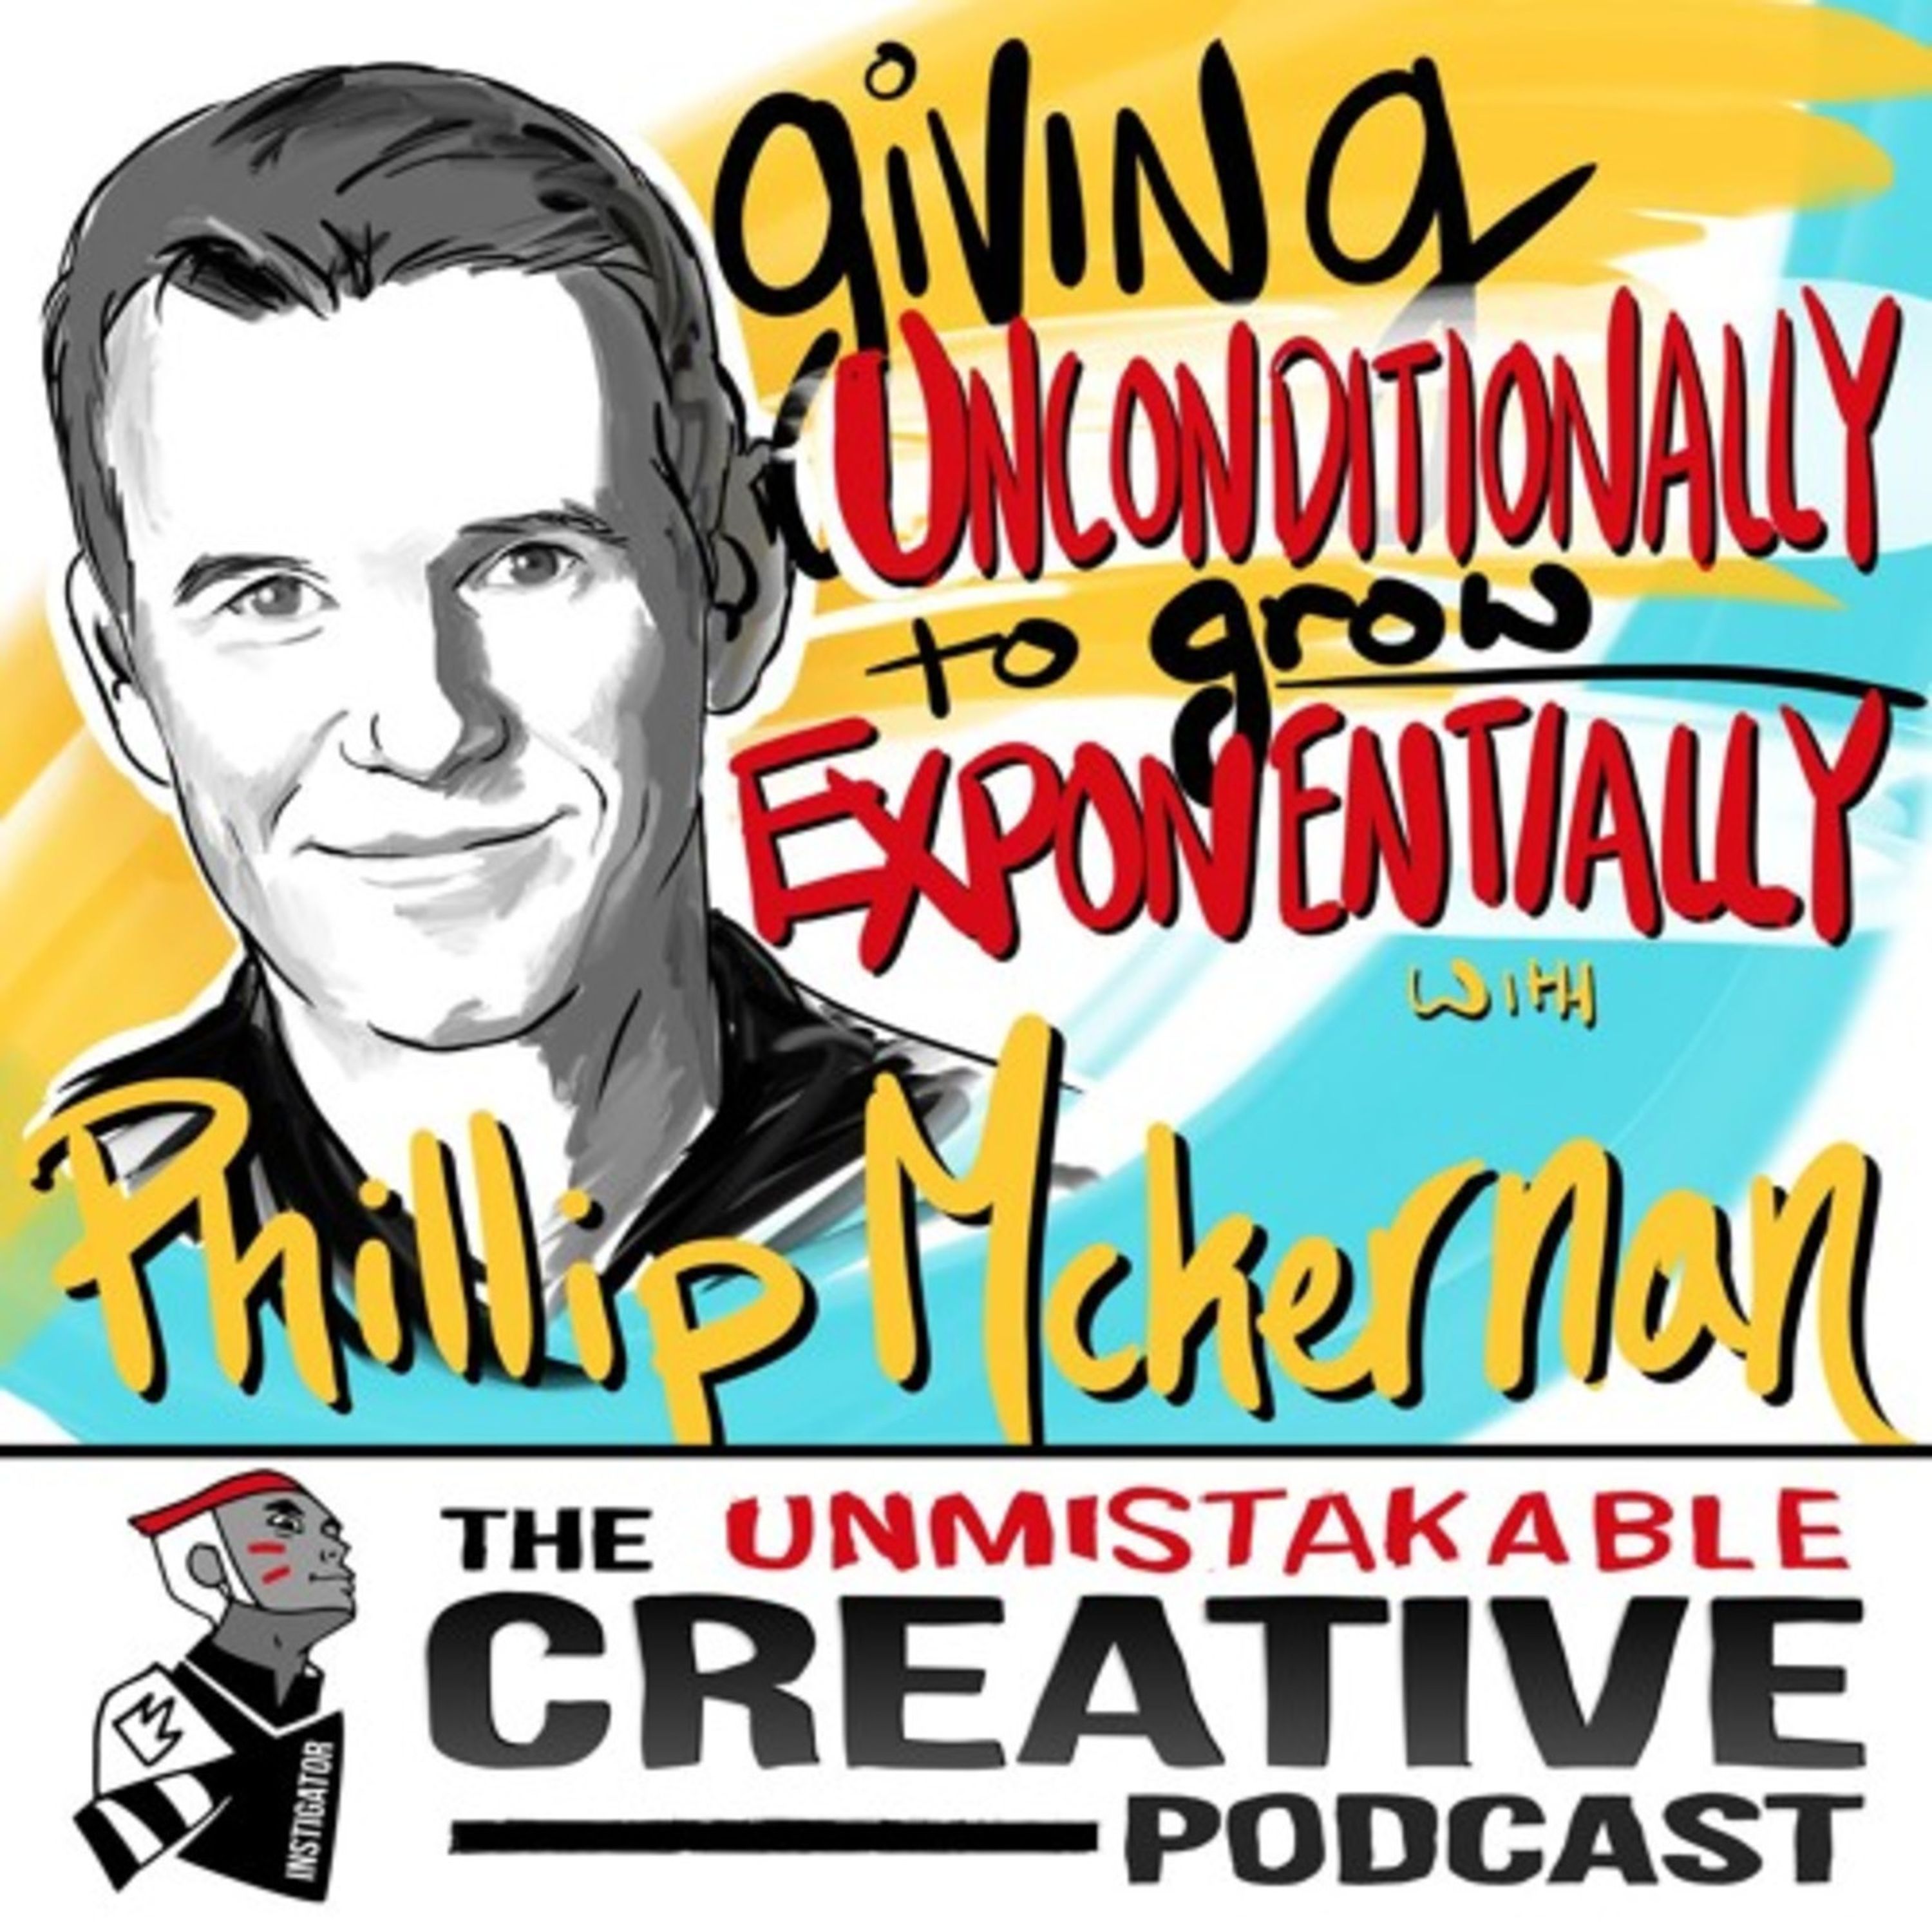 Best of: Giving Unconditionally to Grow Exponentially with Phillip Mckernan